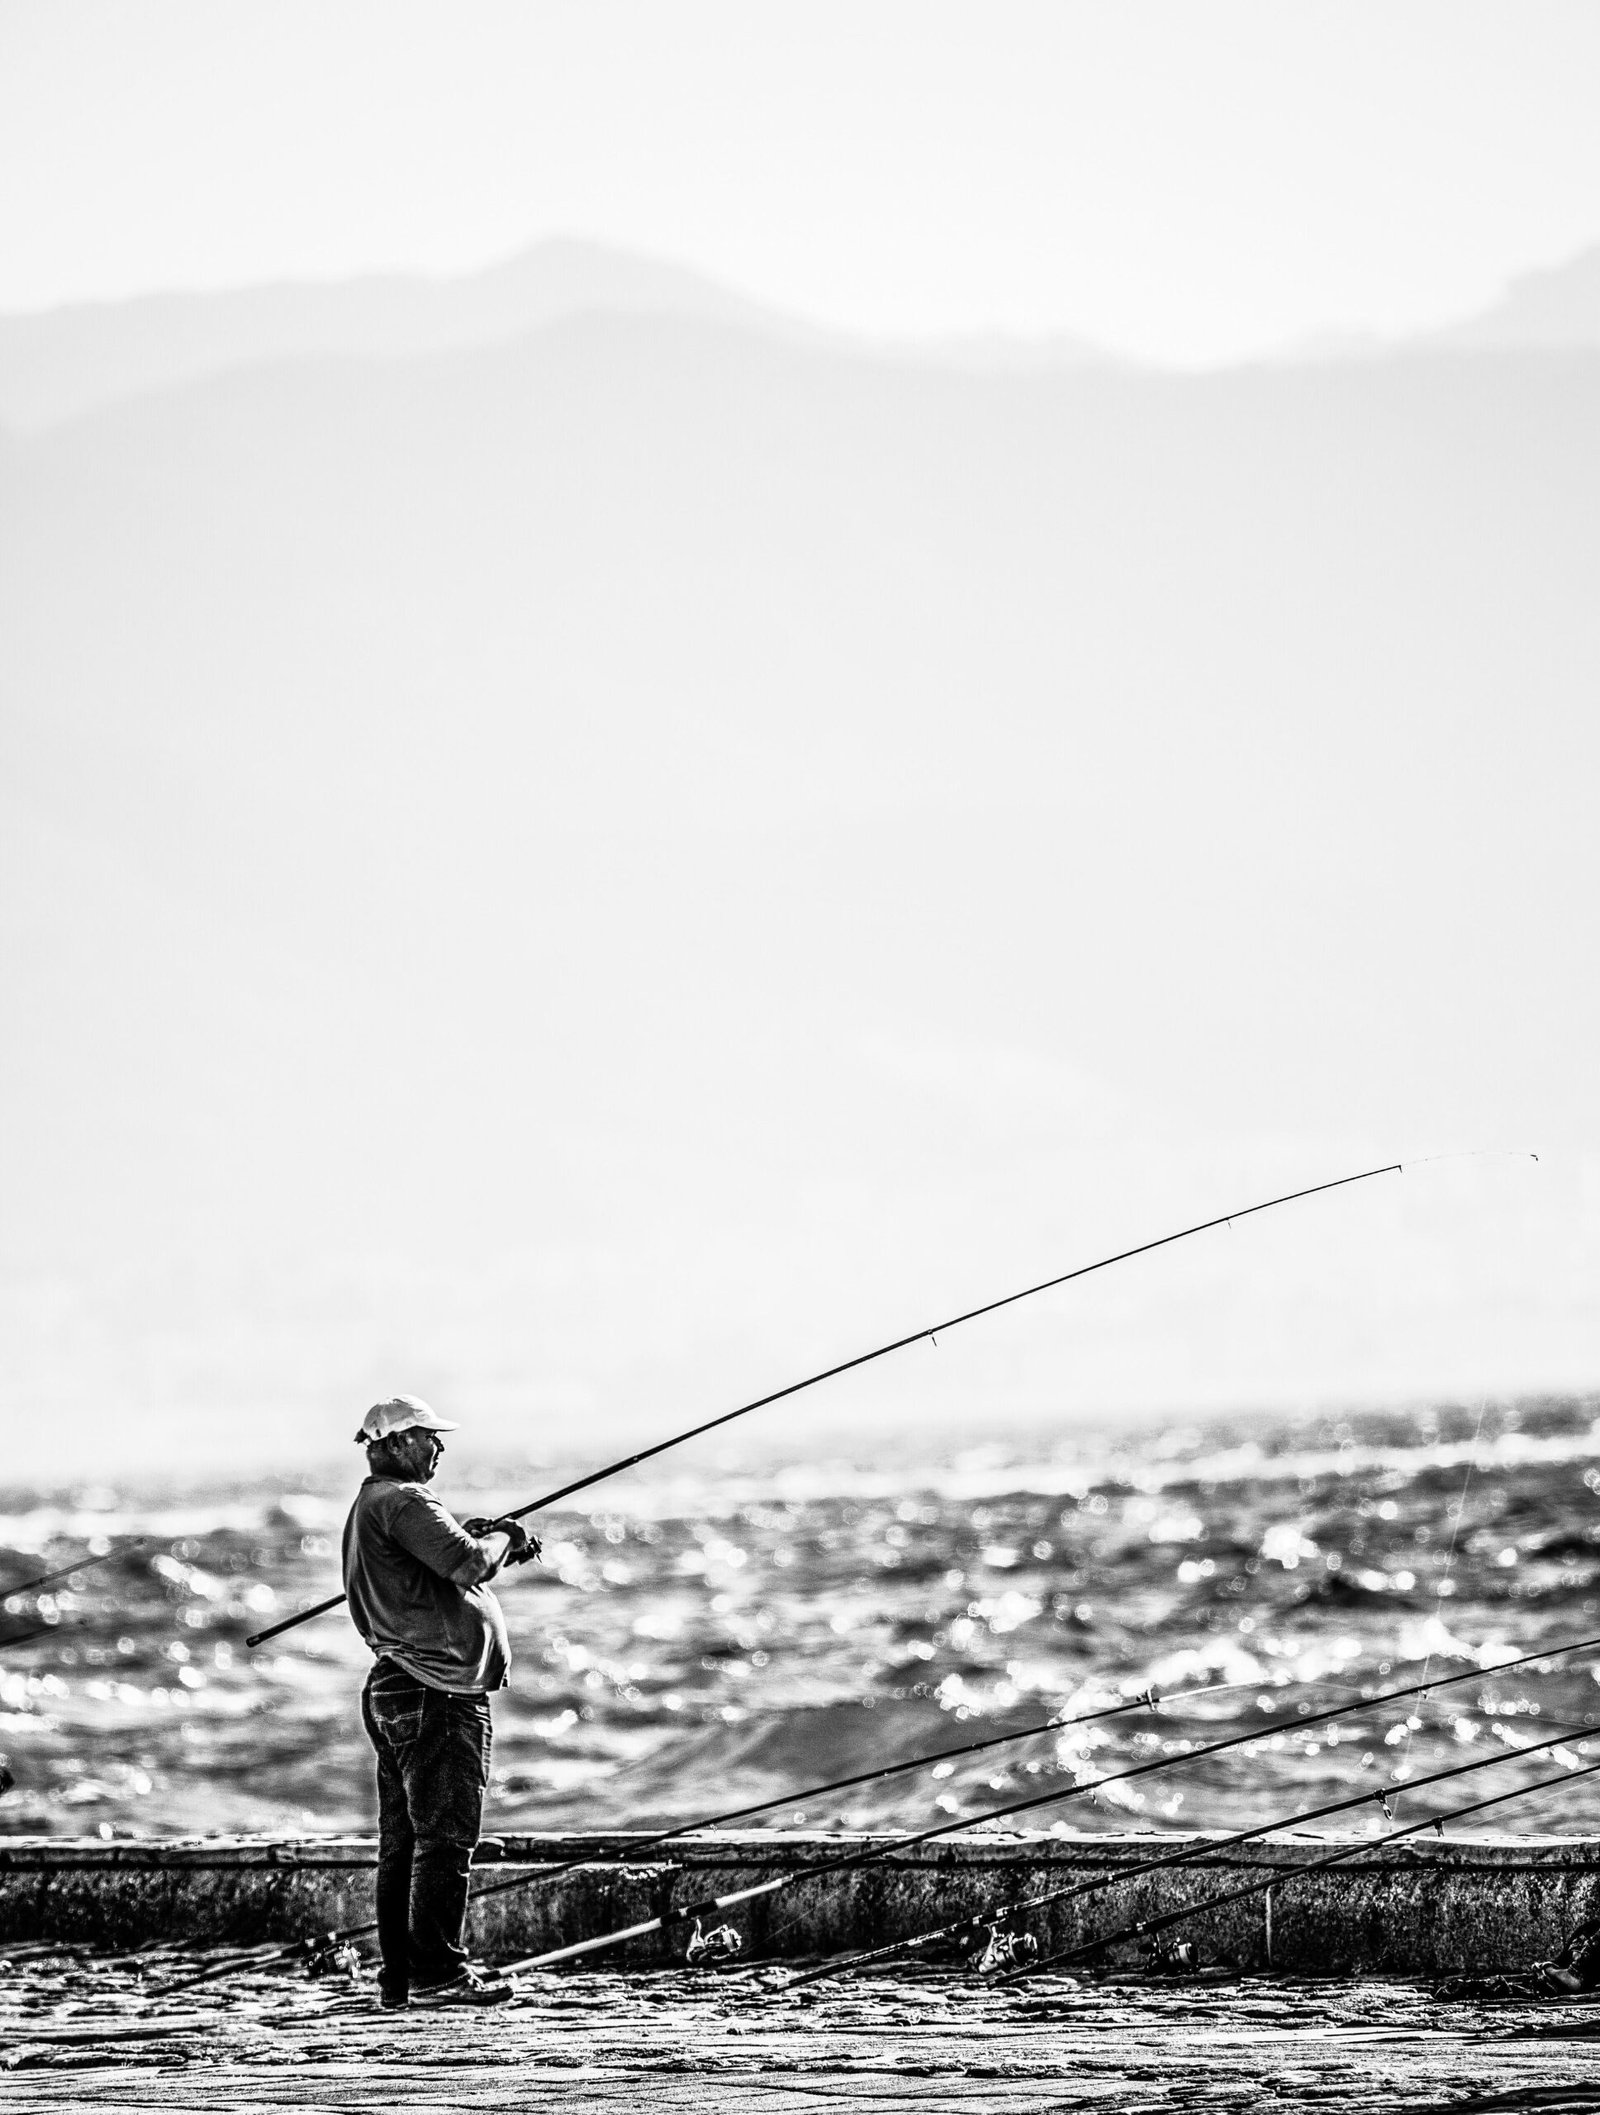 The Essential Guide to 3 Weight Fly Rods: Your Path to Precision